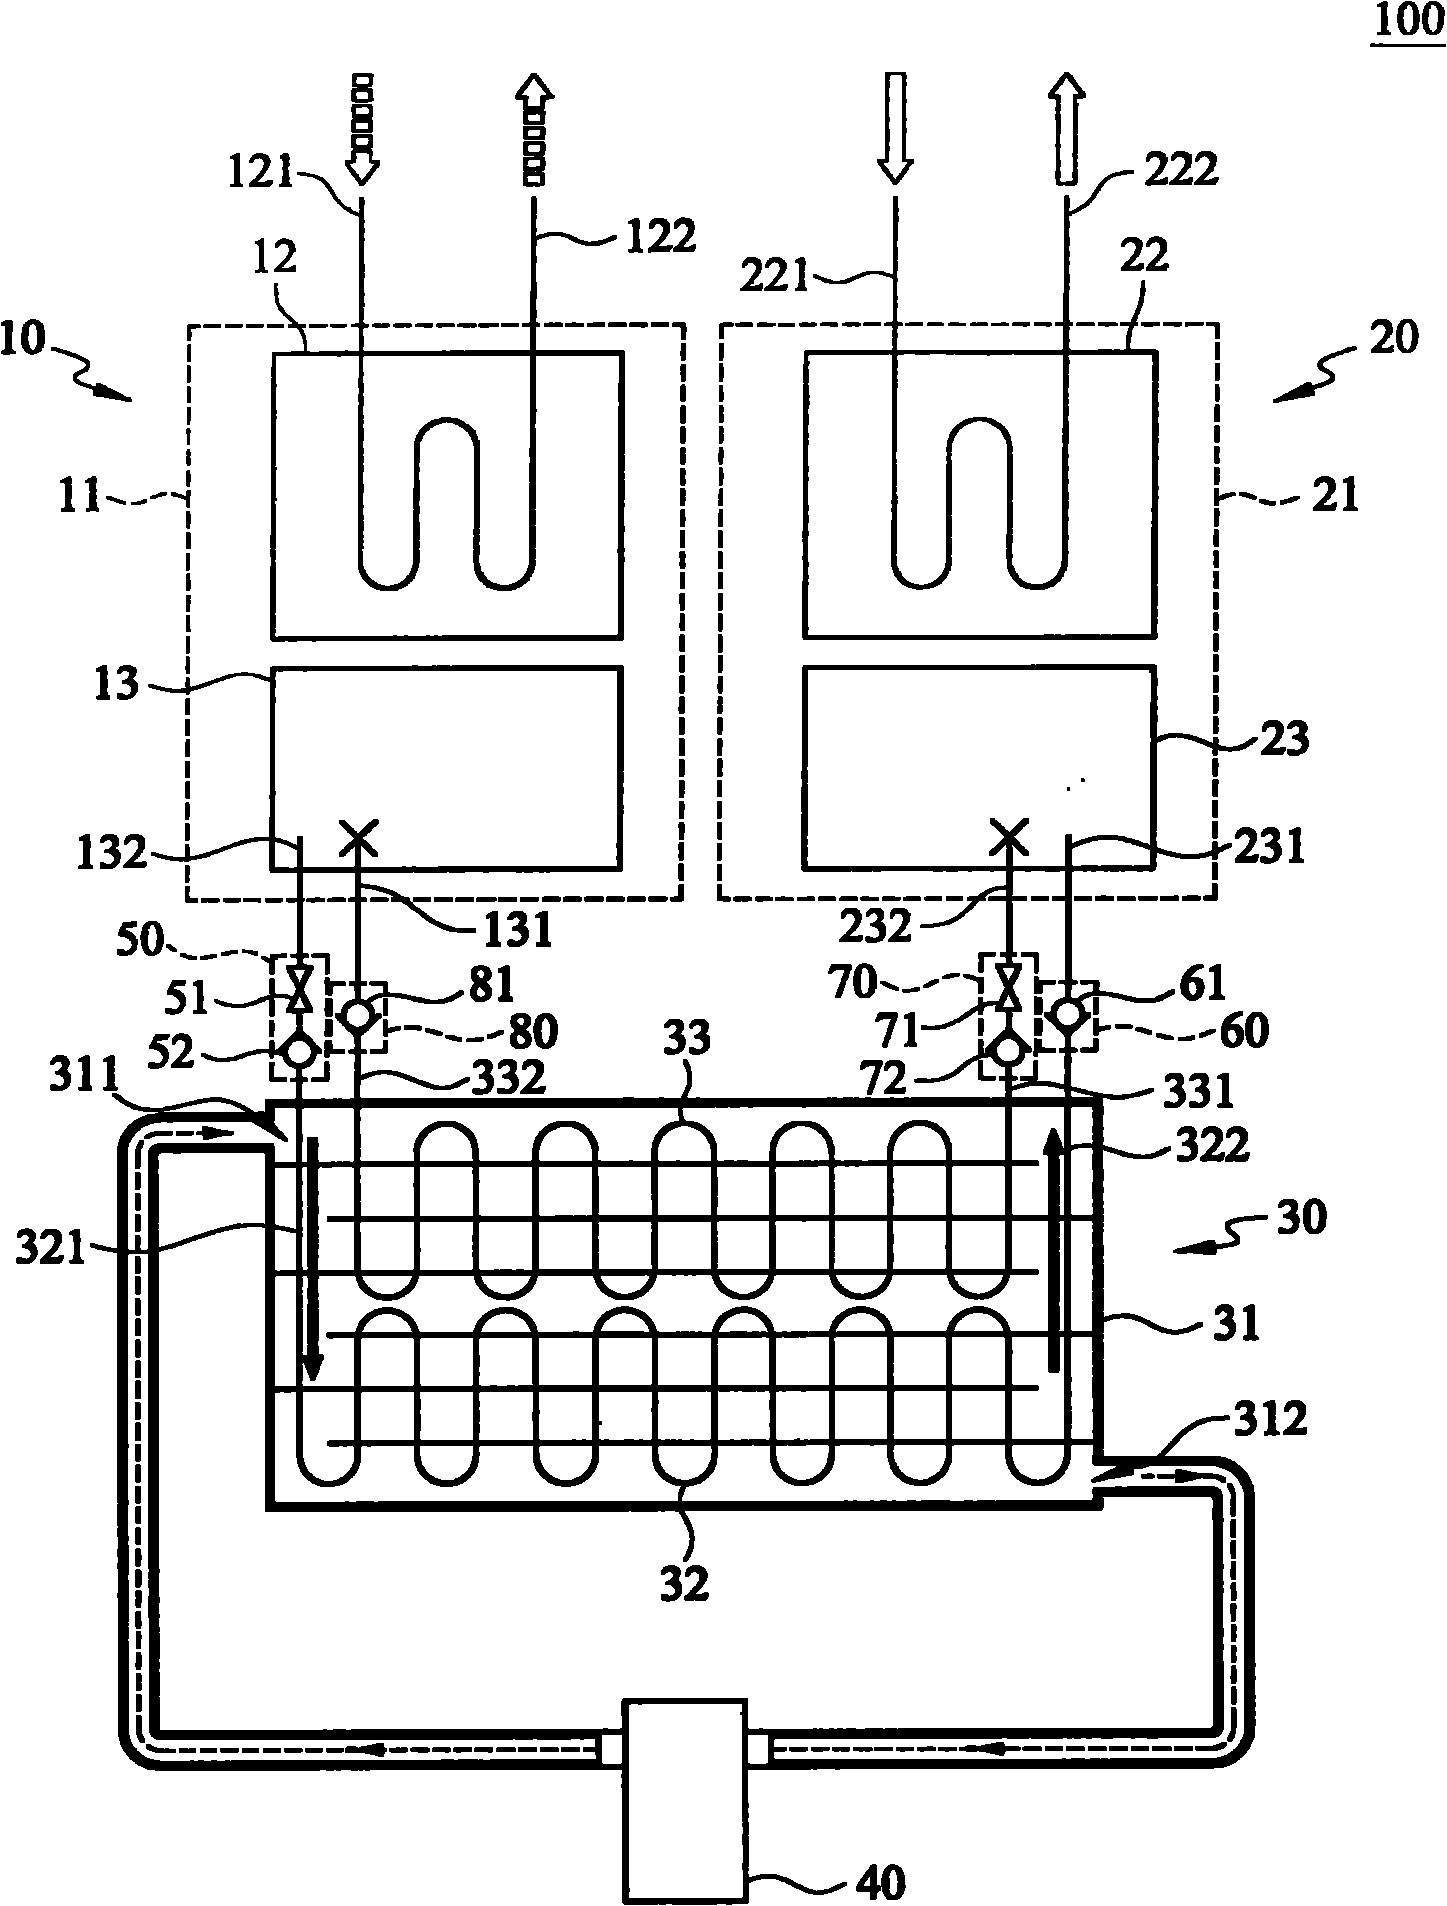 Separated solid-adsorption-type refrigerating system